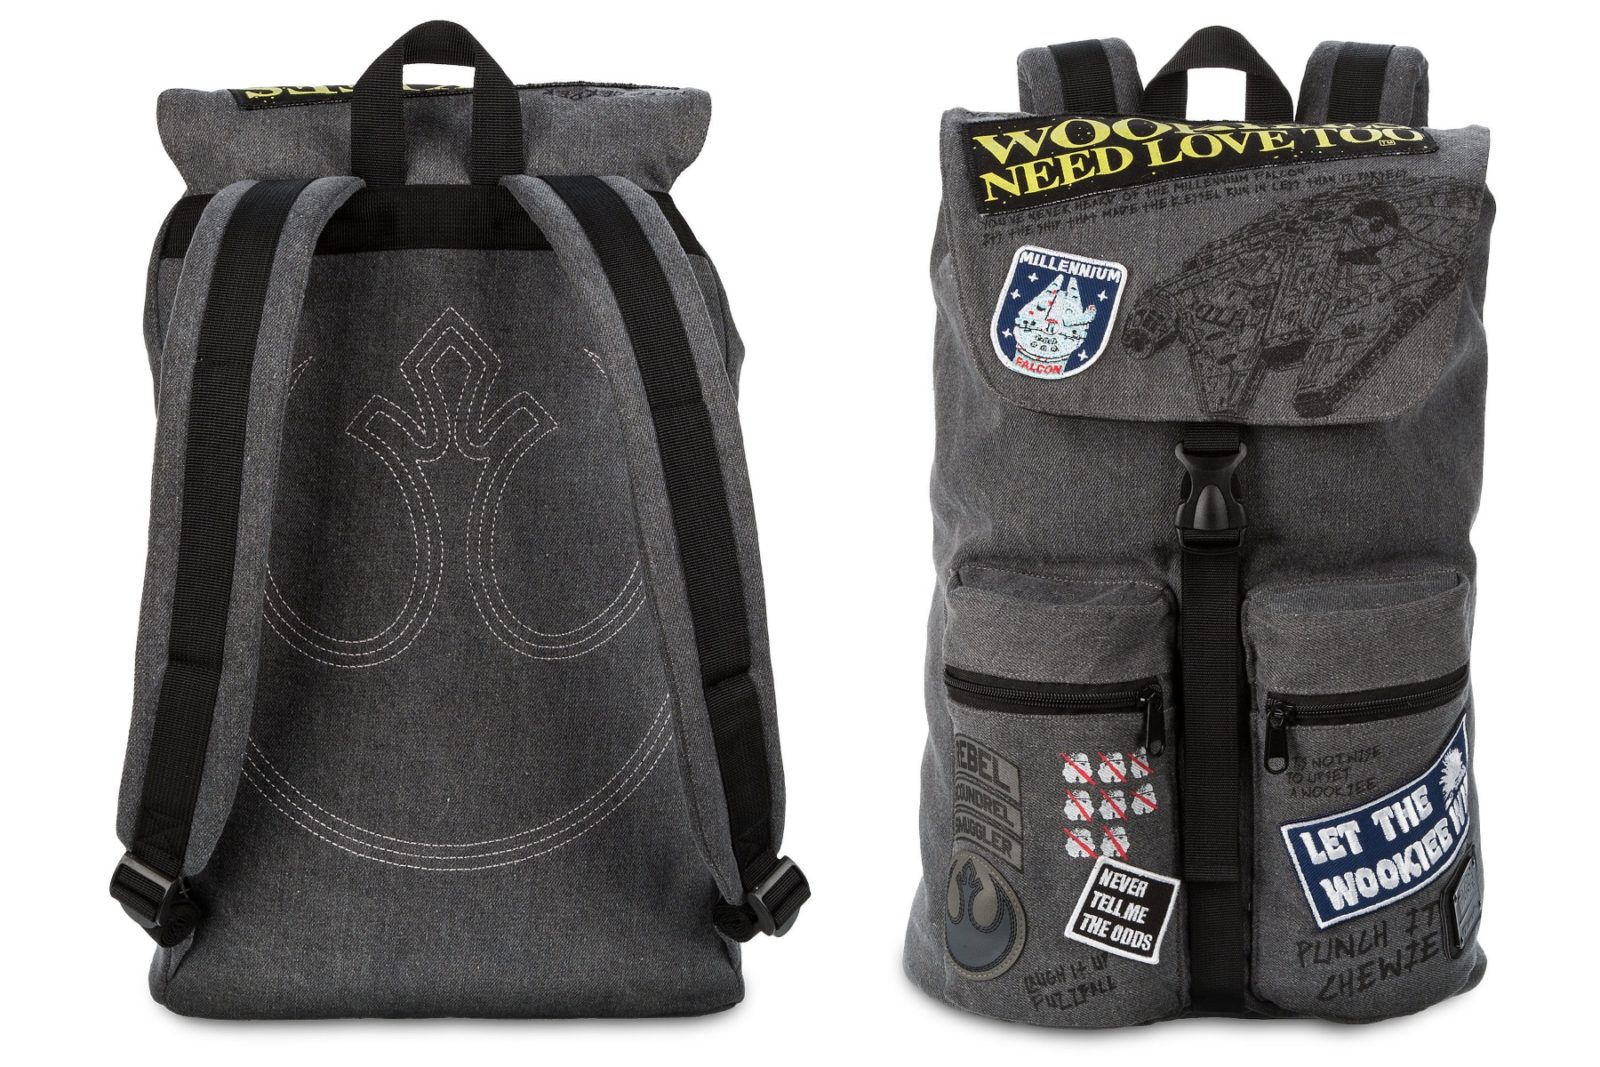 Loungefly x Star Wars Wookiee Backpack at Shop Disney